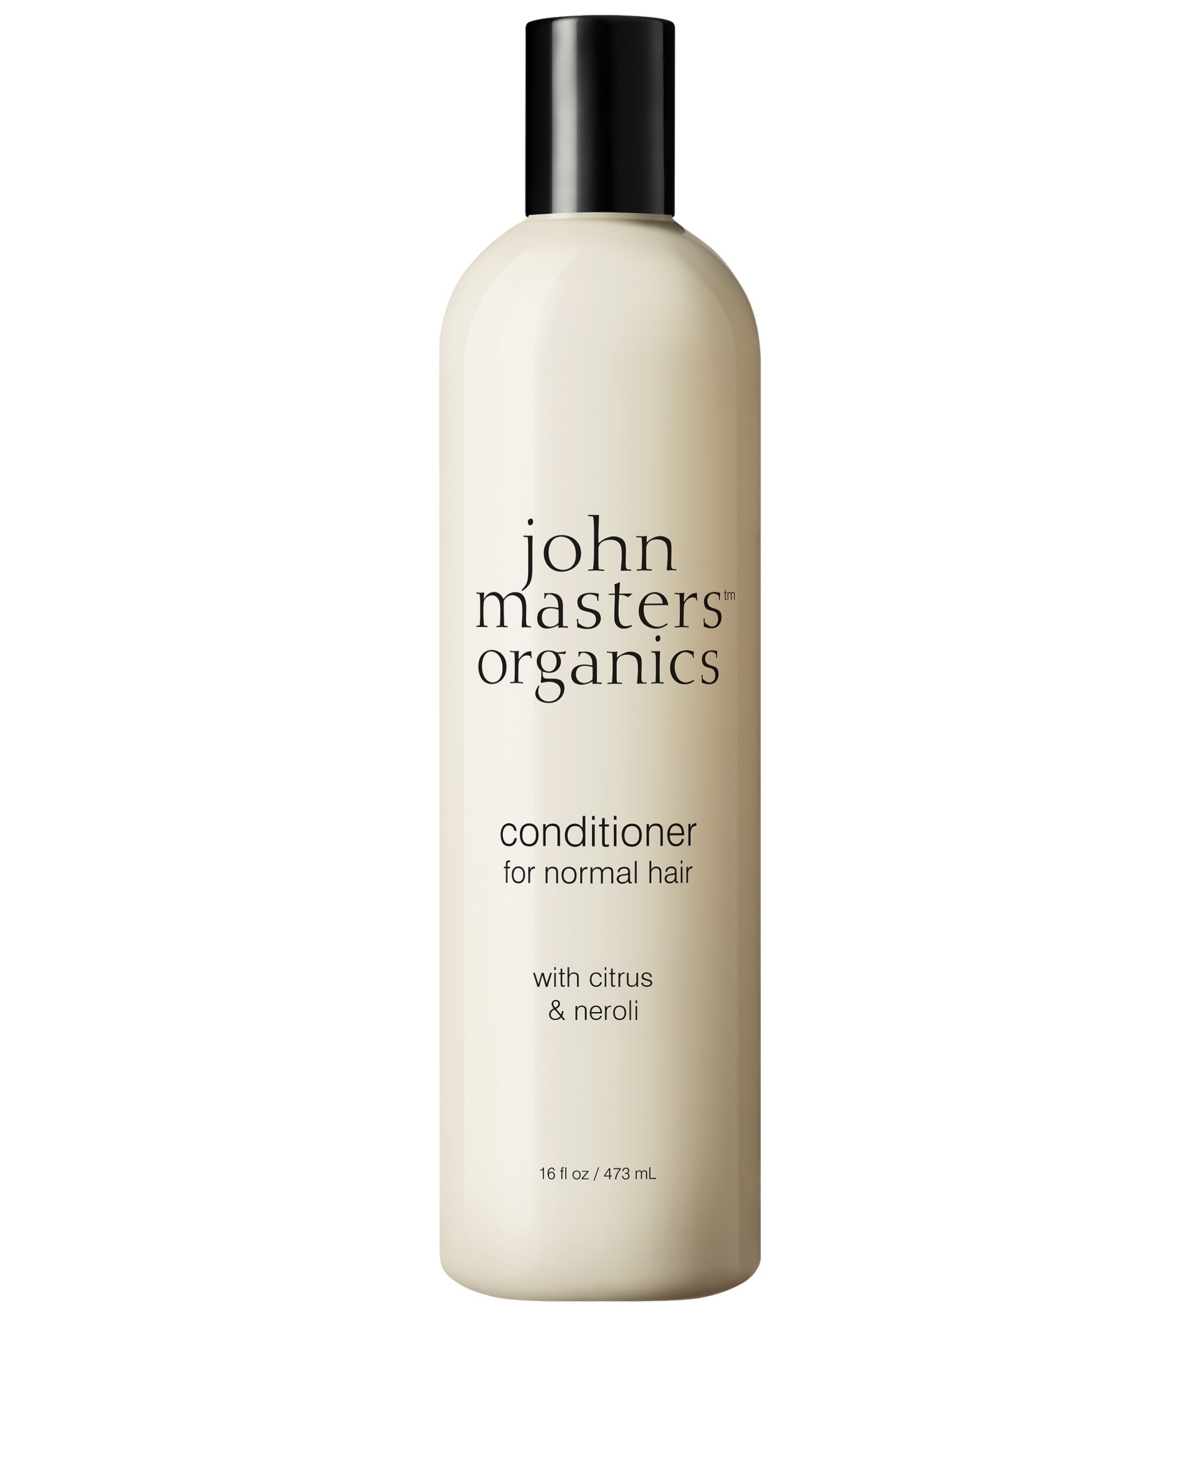 Conditioner For Normal Hair With Citrus & Neroli, 16 oz.